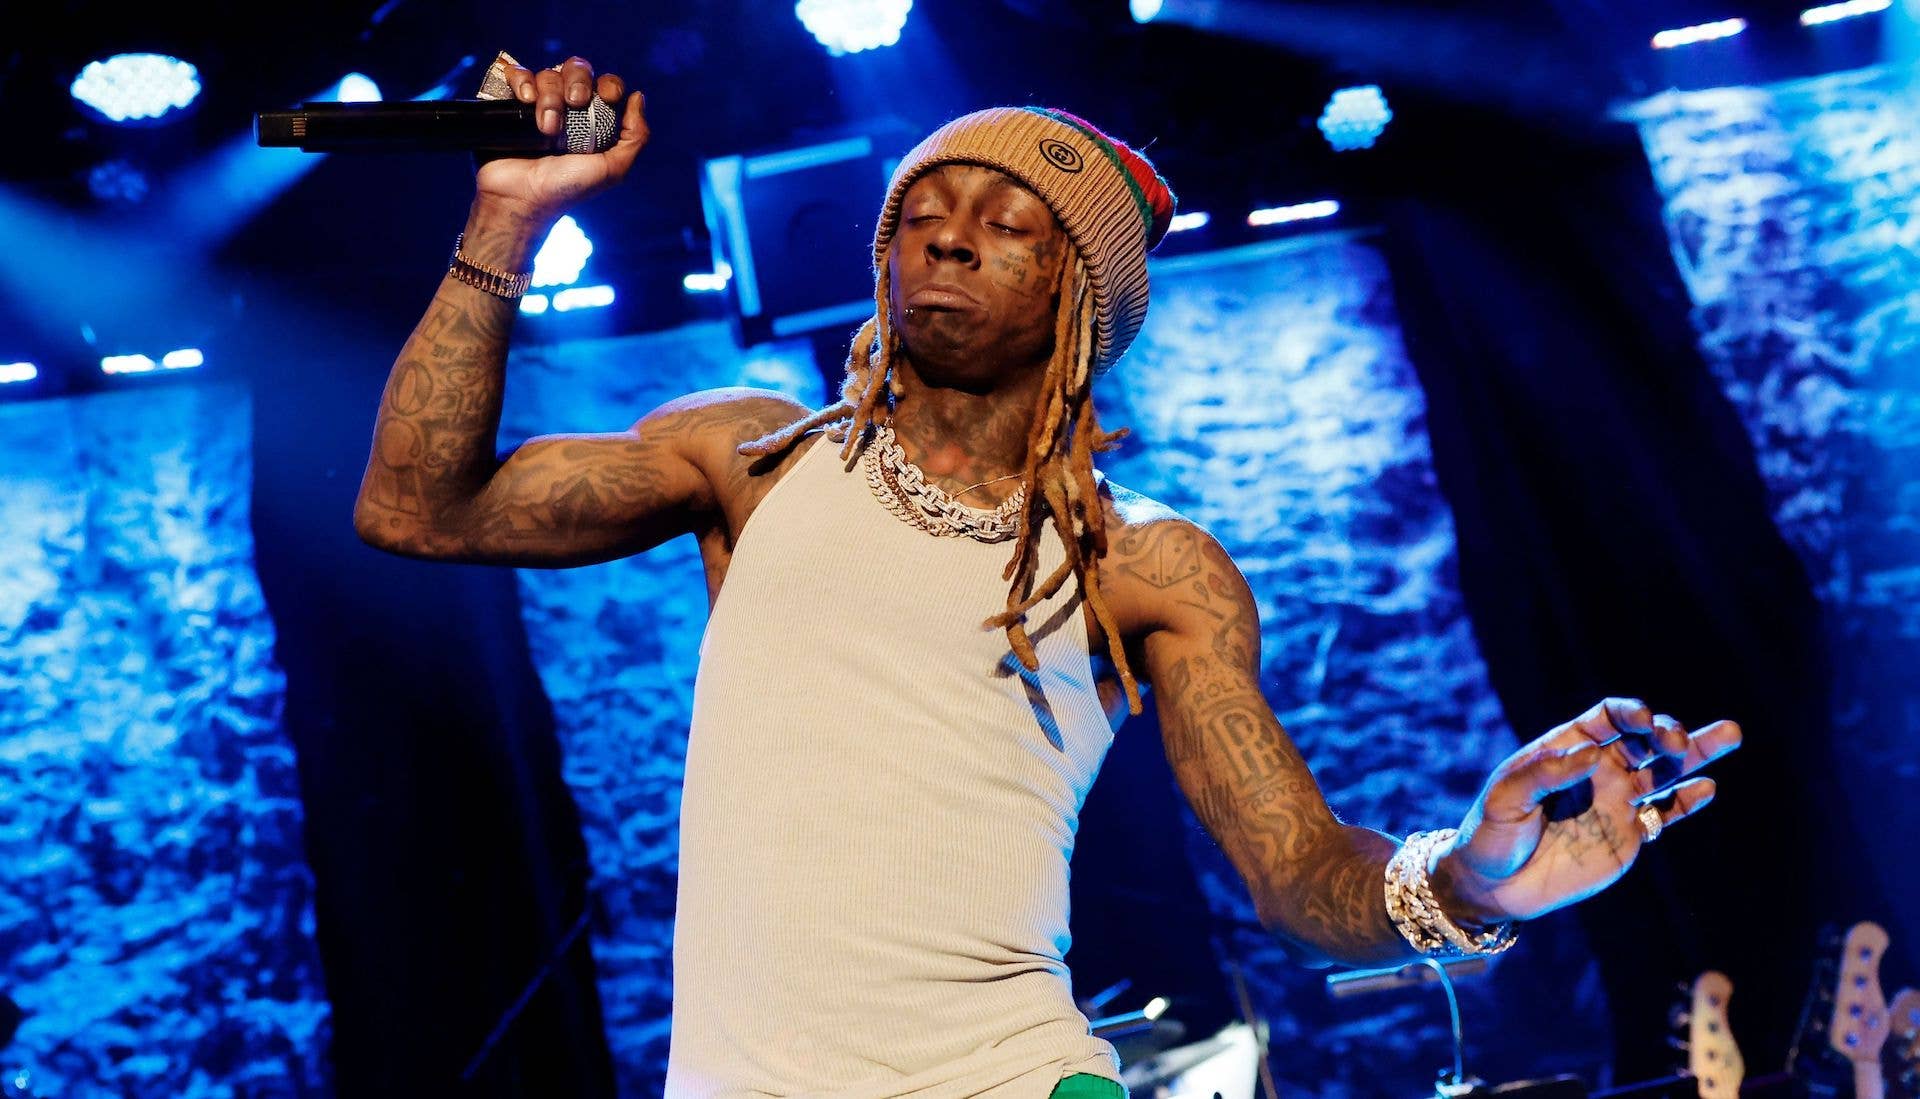 Lil Wayne performs during the pre-Grammys Gala